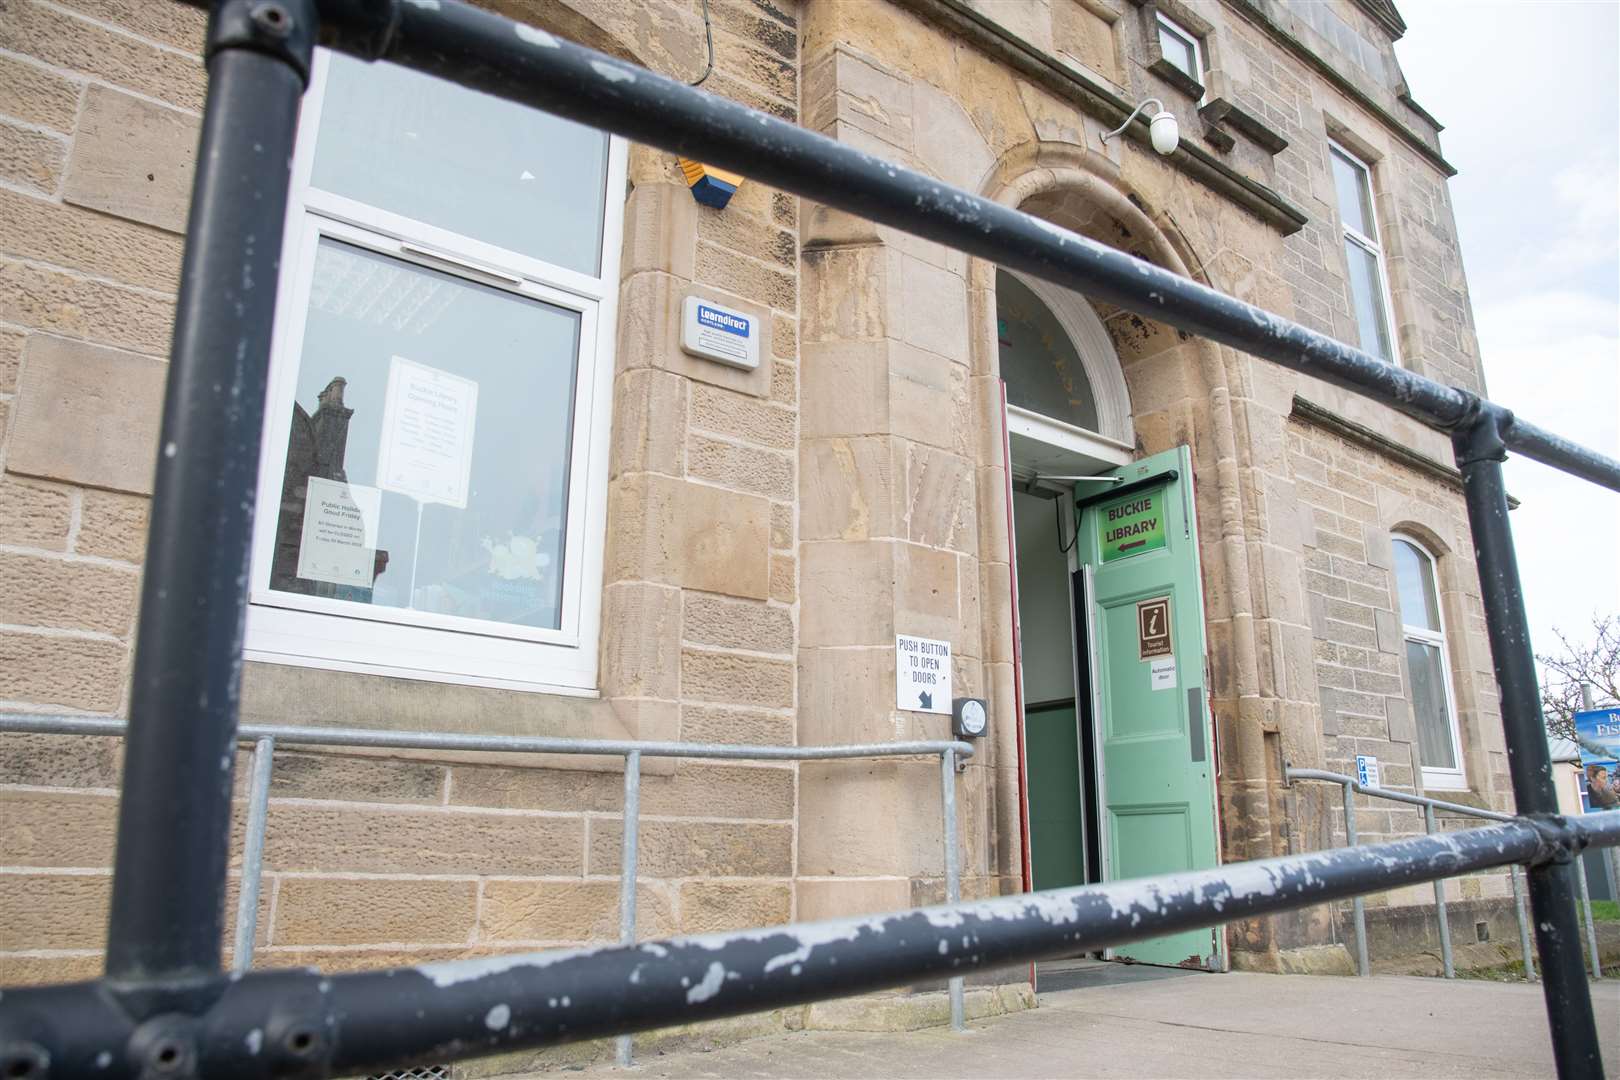 Police in Buckie are appealing for information following at break-in at the town's library. Picture: Daniel Forsyth